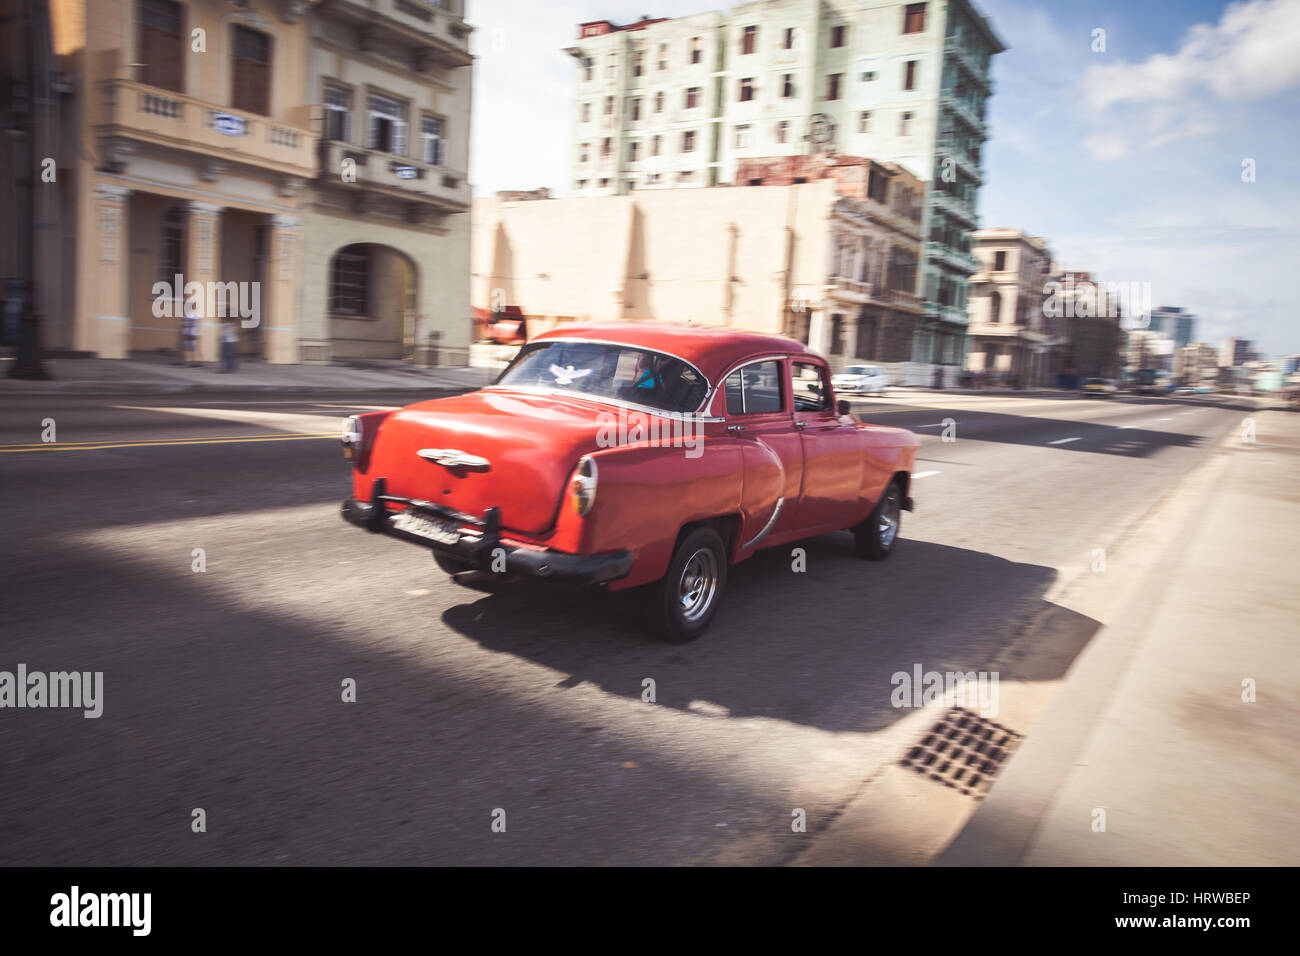 Vintage classic american car in a old street of old Avana, Cuba. Stock Photo